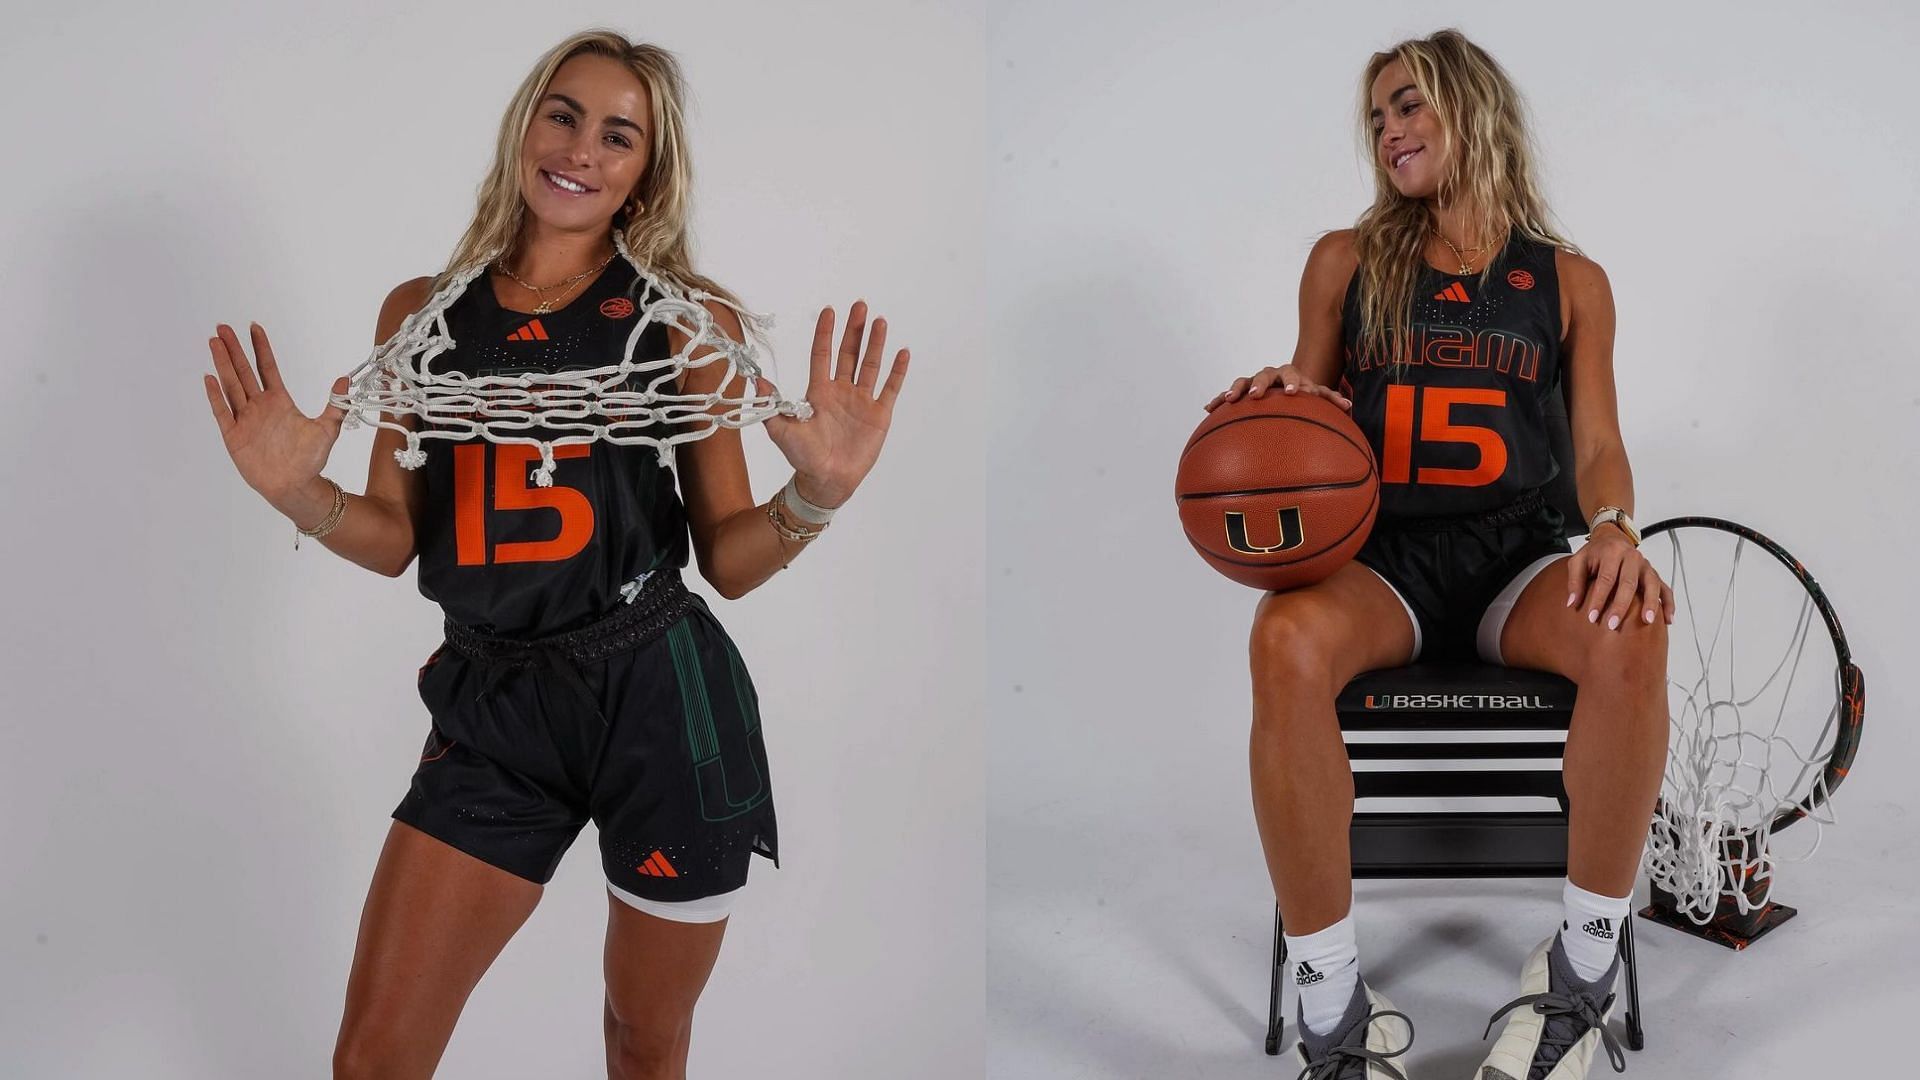 Hannah Cavinder Returns to Miami with #15 Jersey